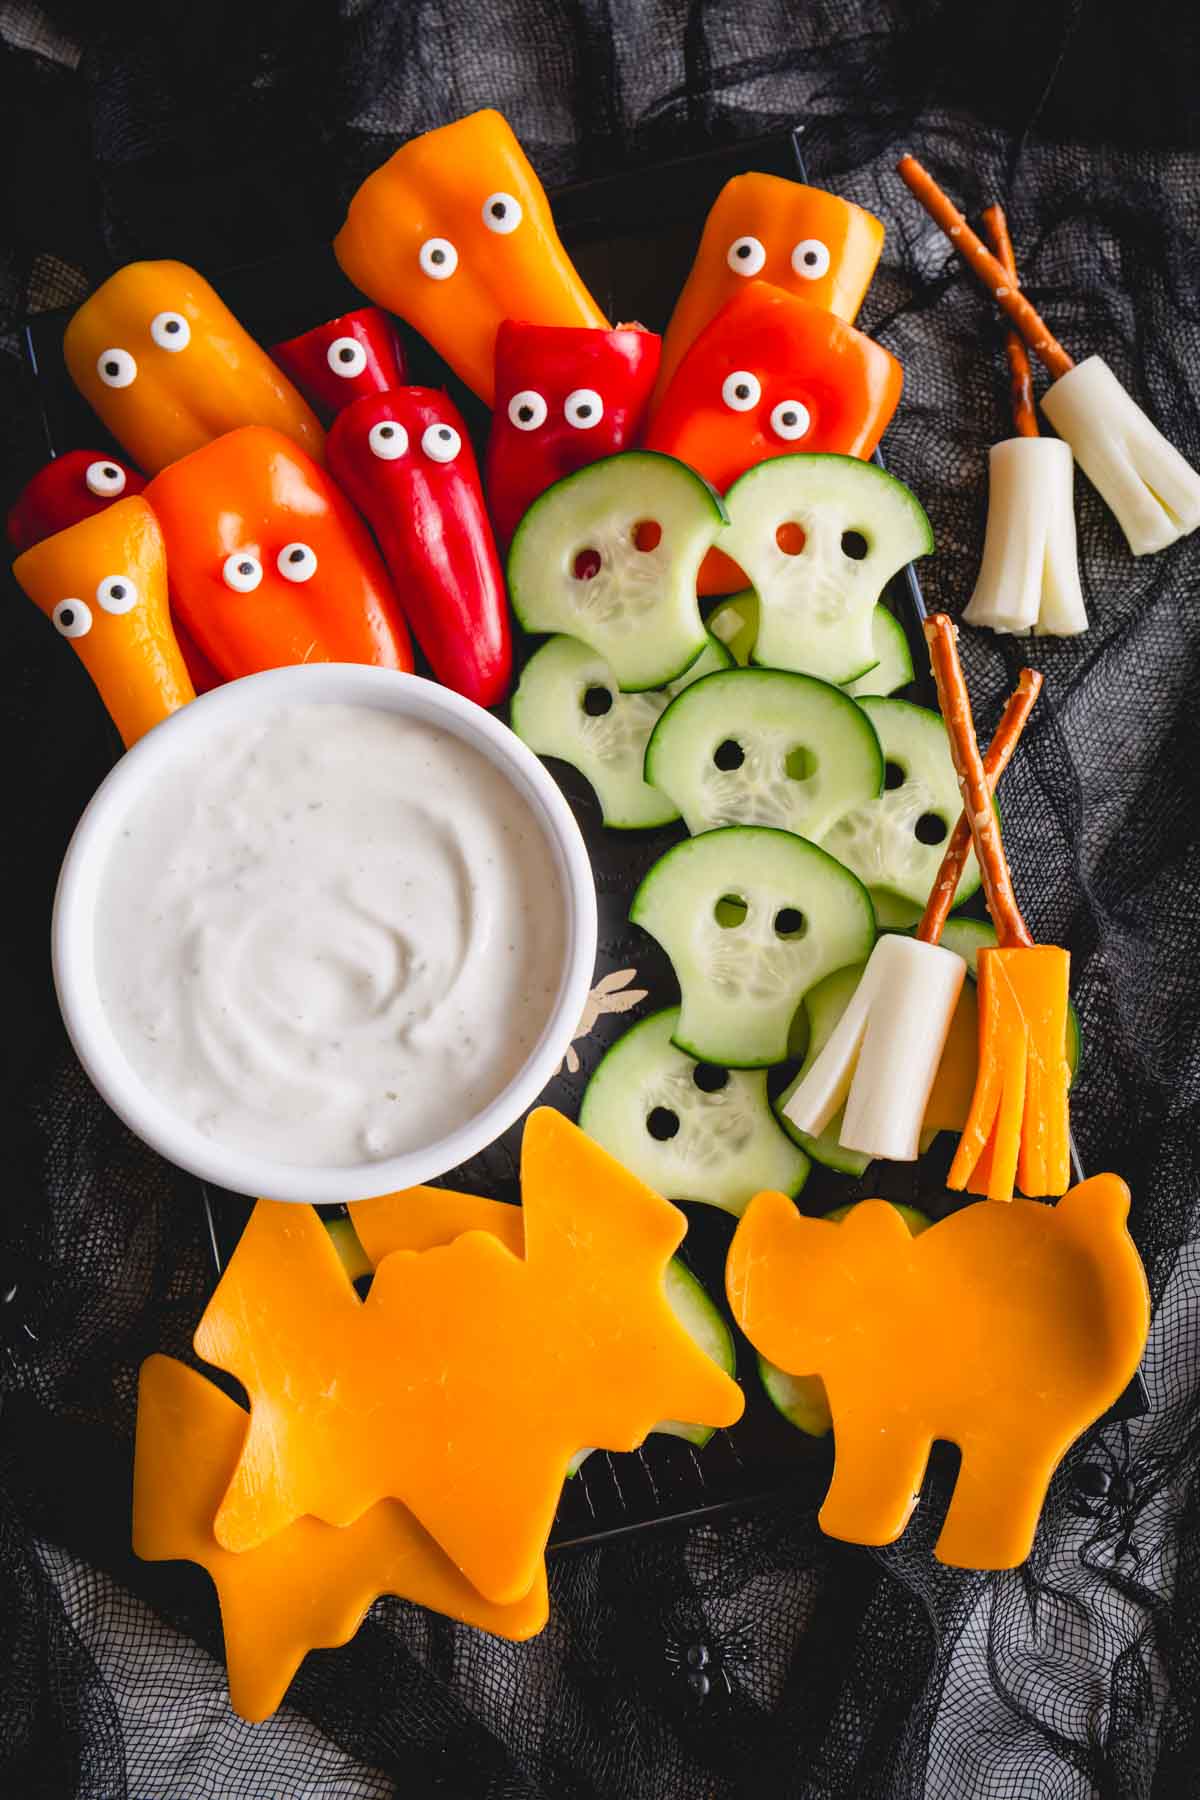 Ghost bell peppers, mummy cucumbers, cheese broomsticks, and cheese shapes with dip.